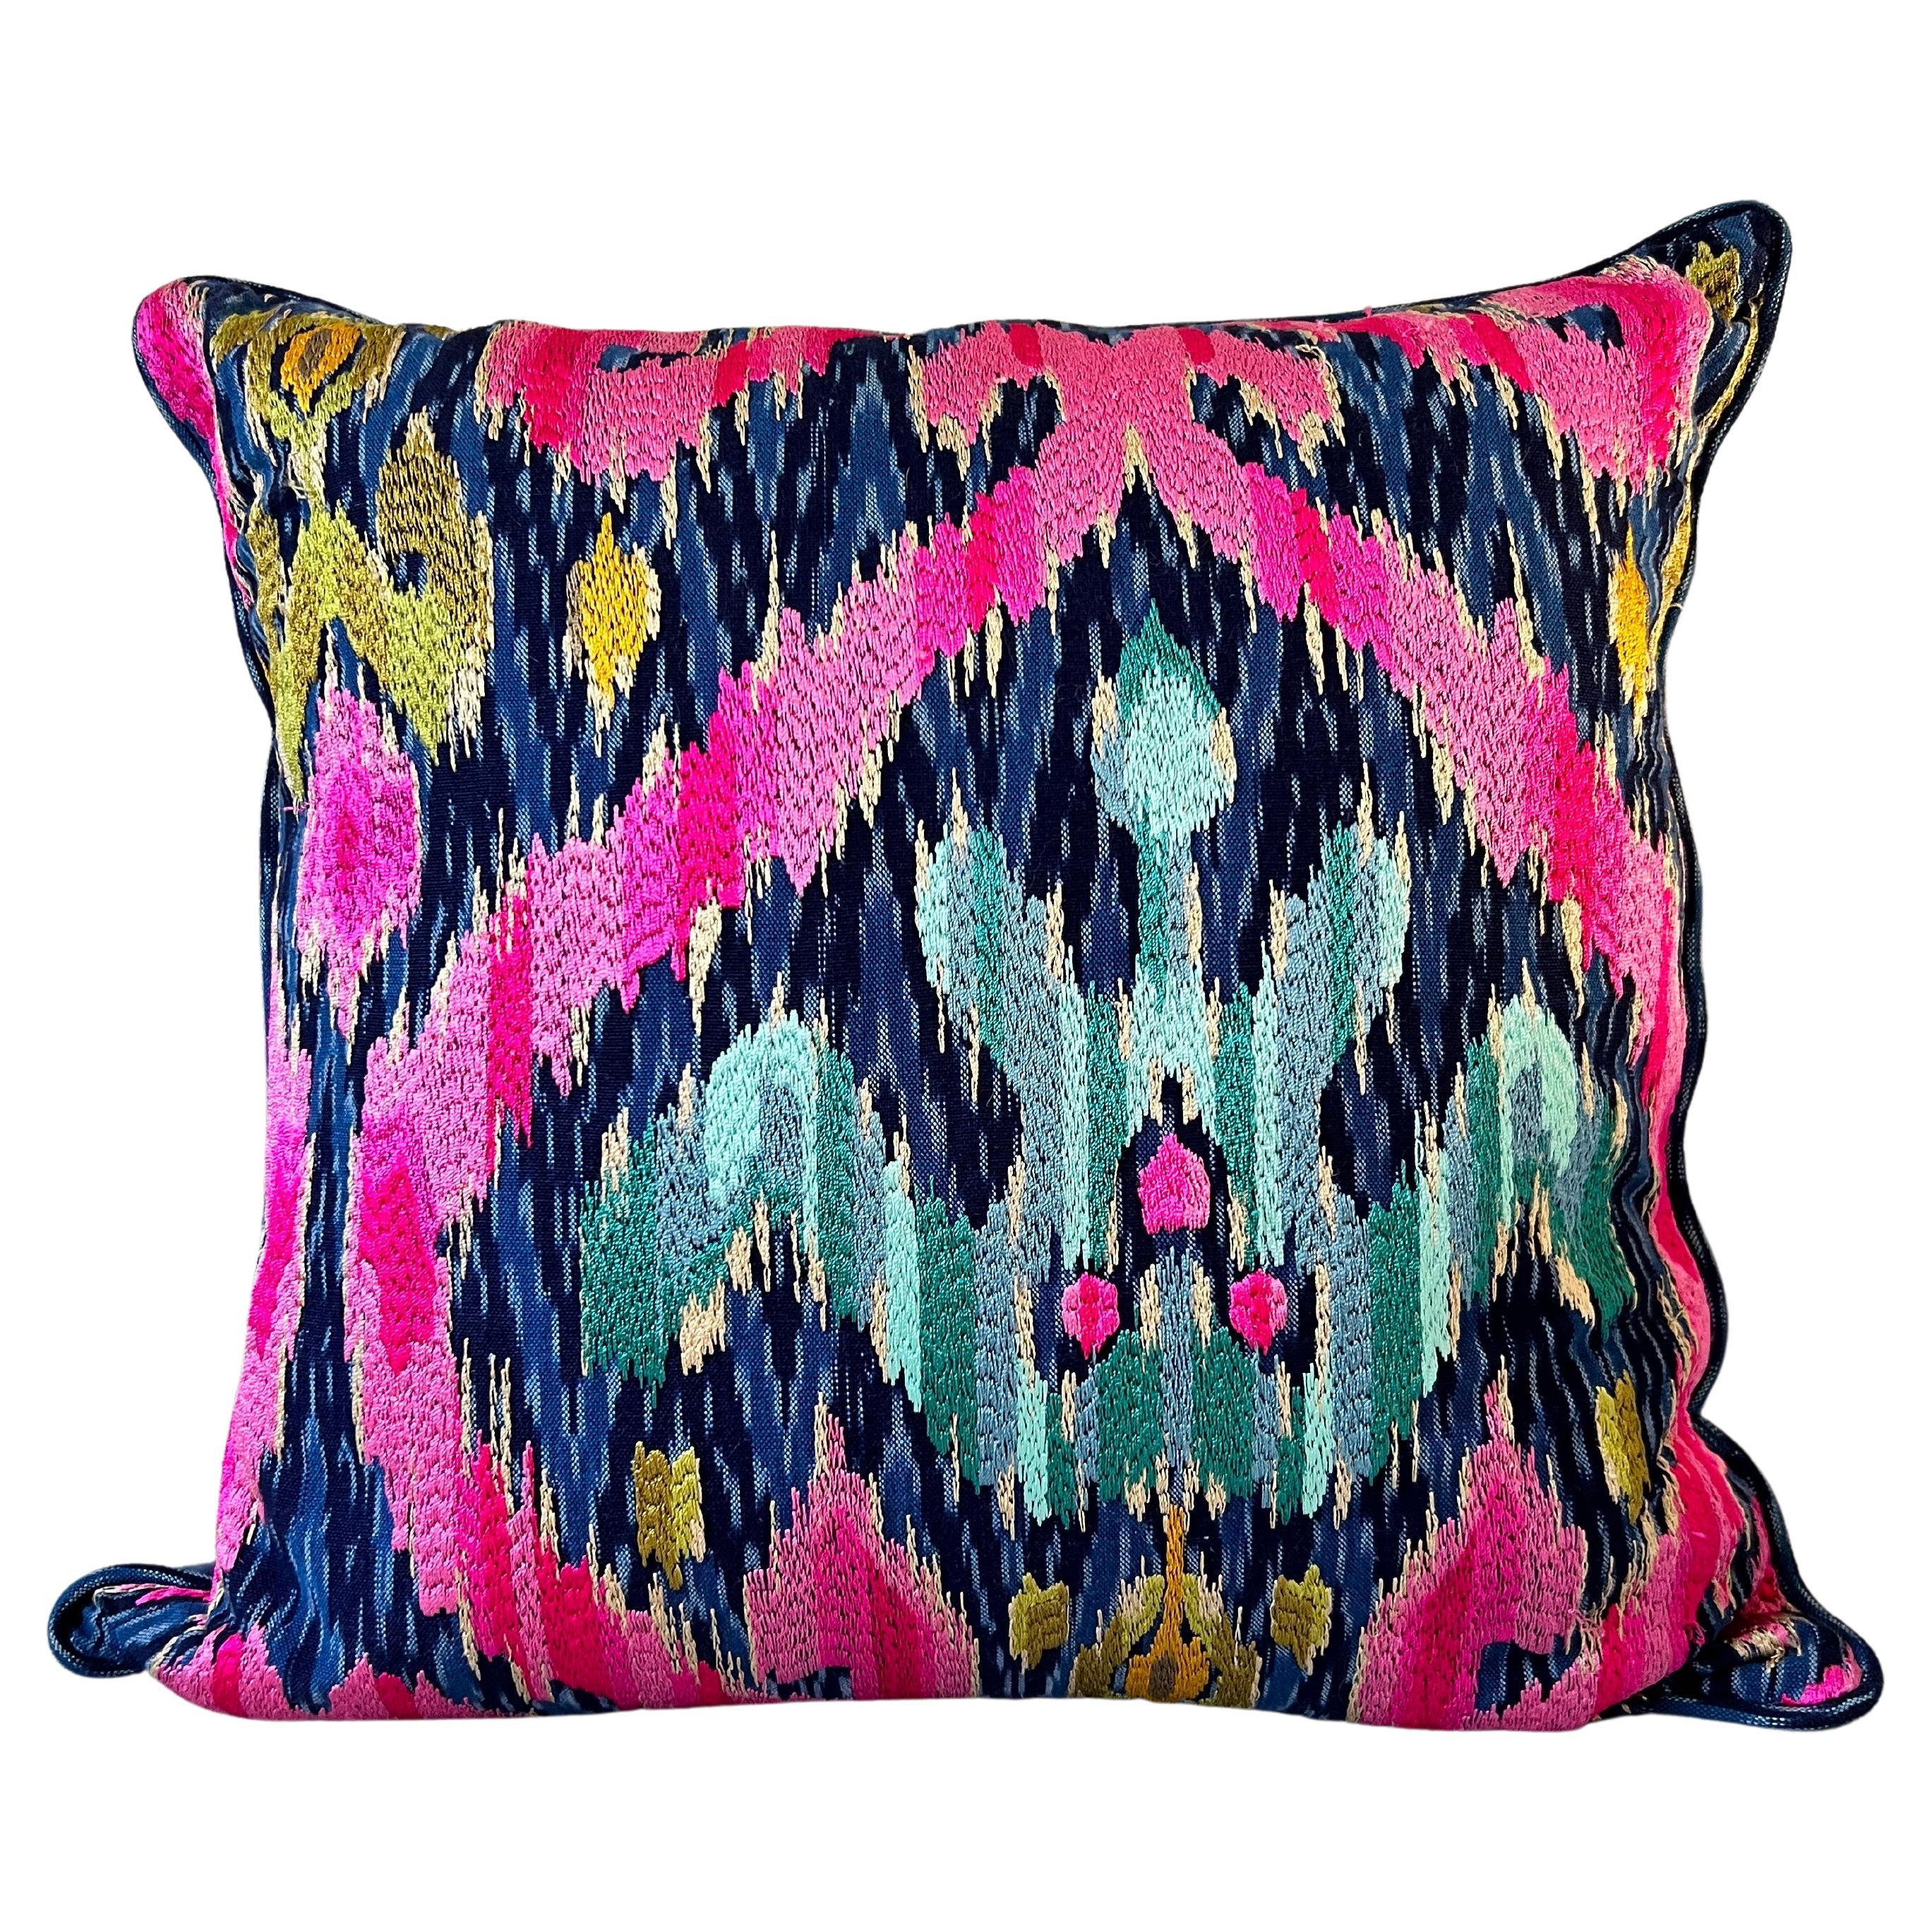 Bohemian Throw Pillow in Embroidered Ikat by La Maison Pierre Frey